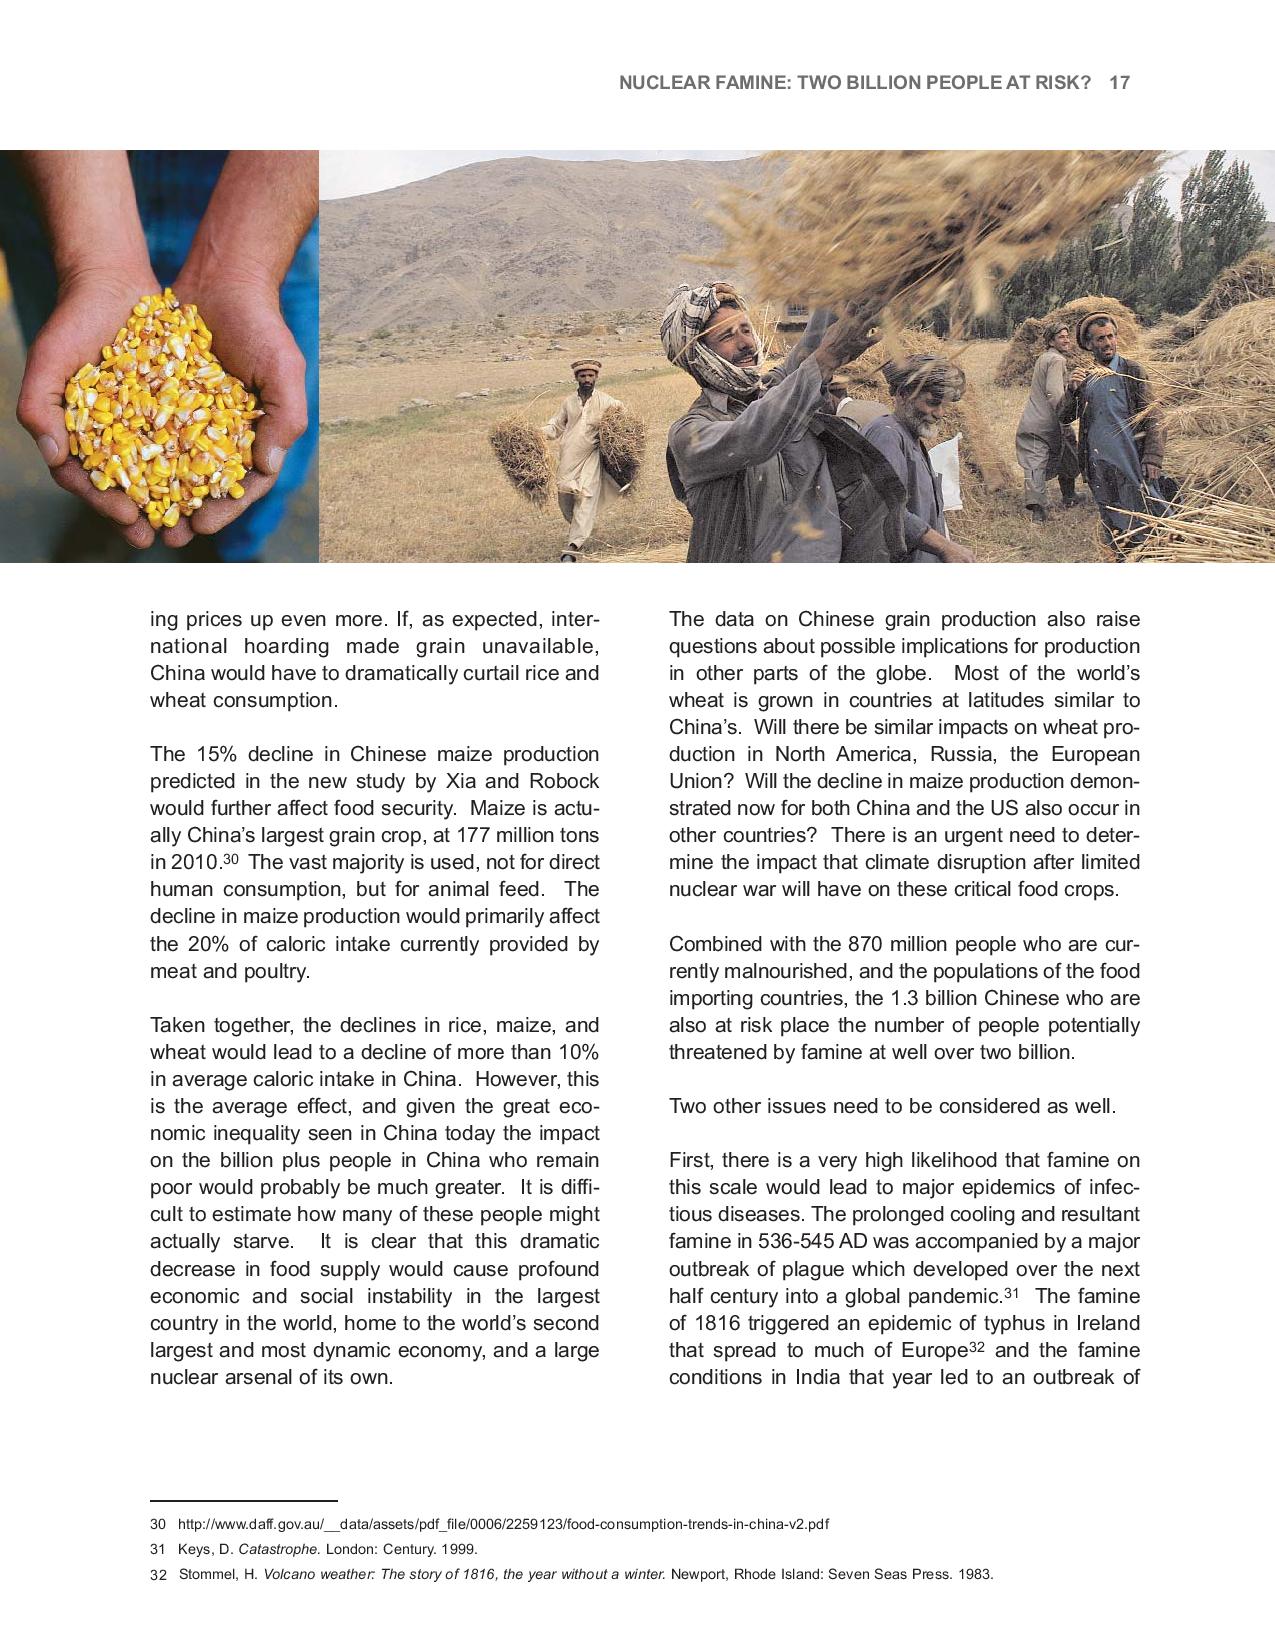 nuclear-famine-two-billion-at-risk-2013-page-019.jpg